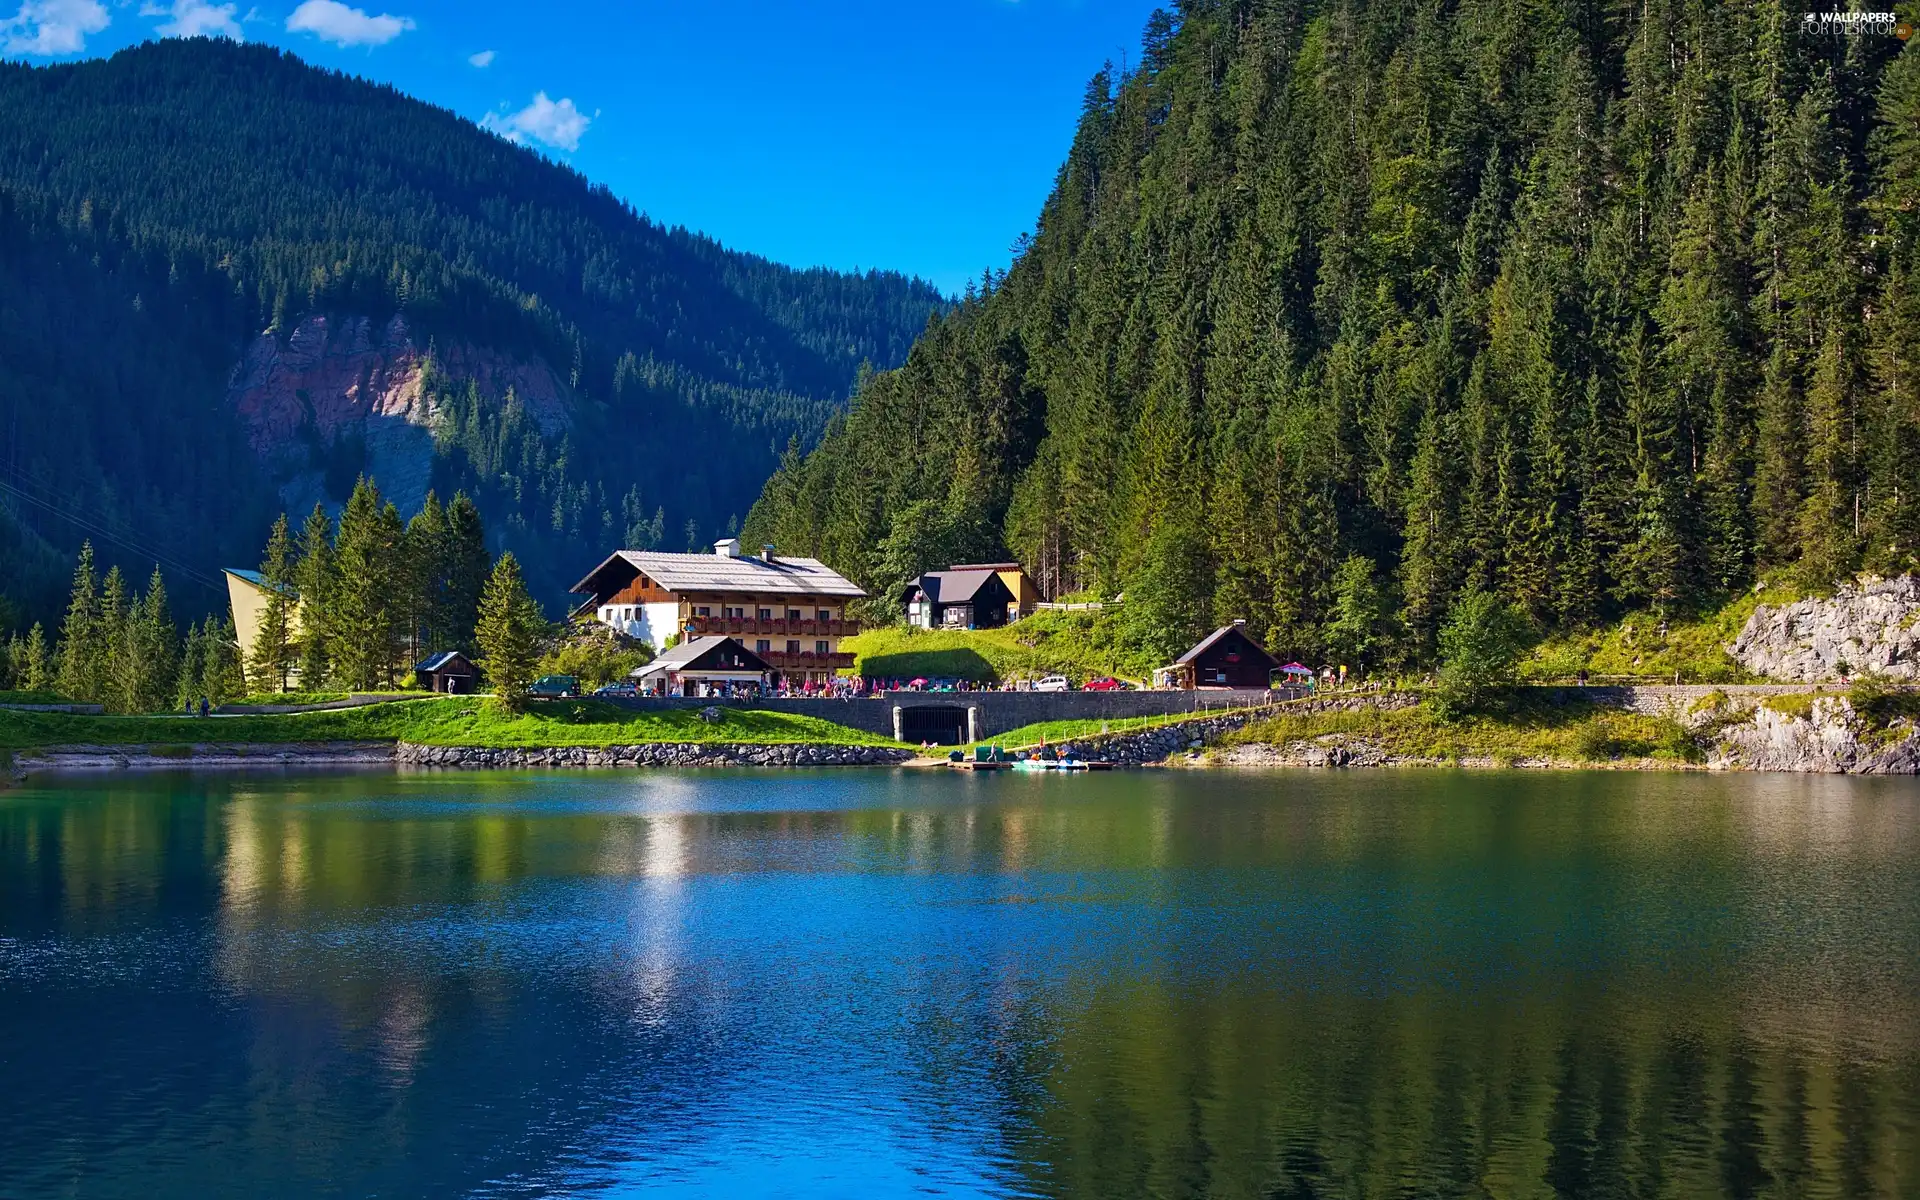 woods, Alps, Houses, landscape, lake, Mountains